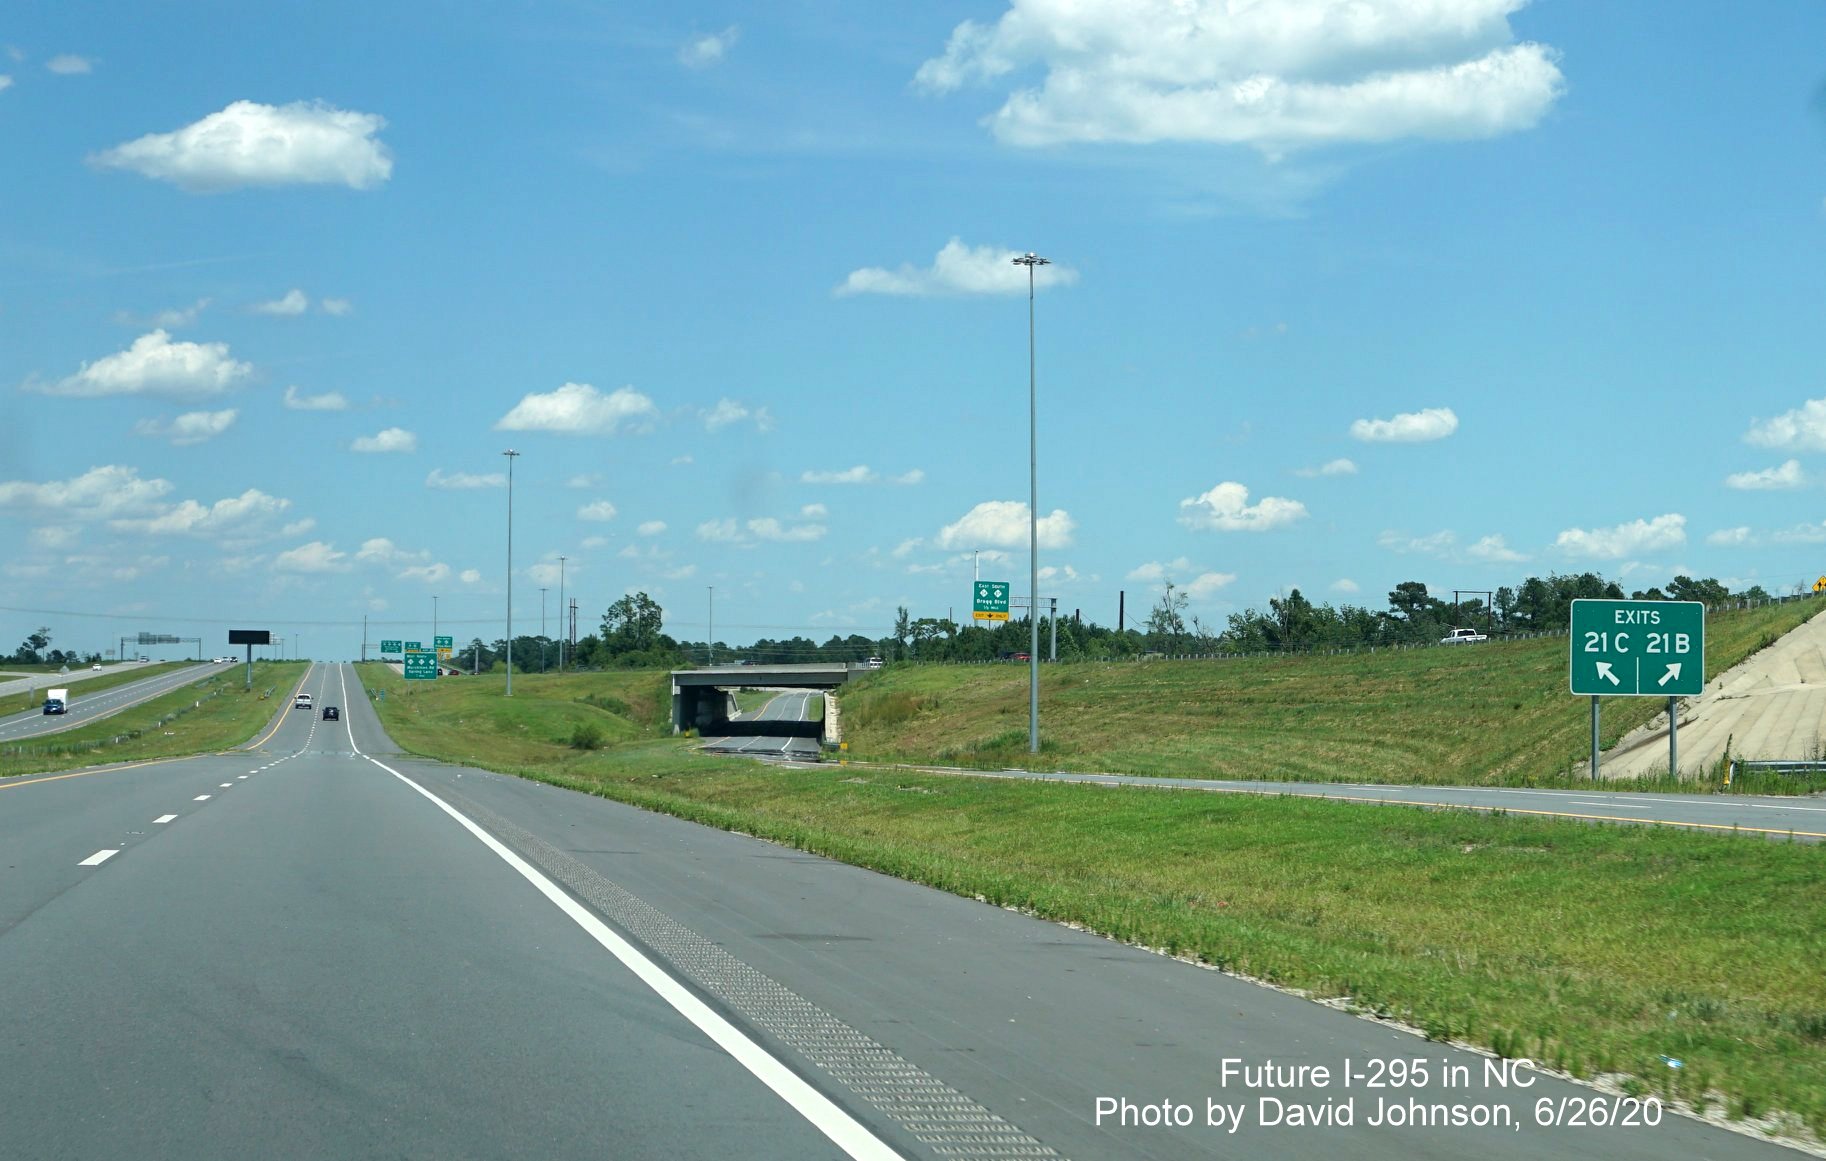 Image of gore signage at split of ramps to Bragg Blvd and the All American Freeway from I-295 North, by David Johnson June 2020